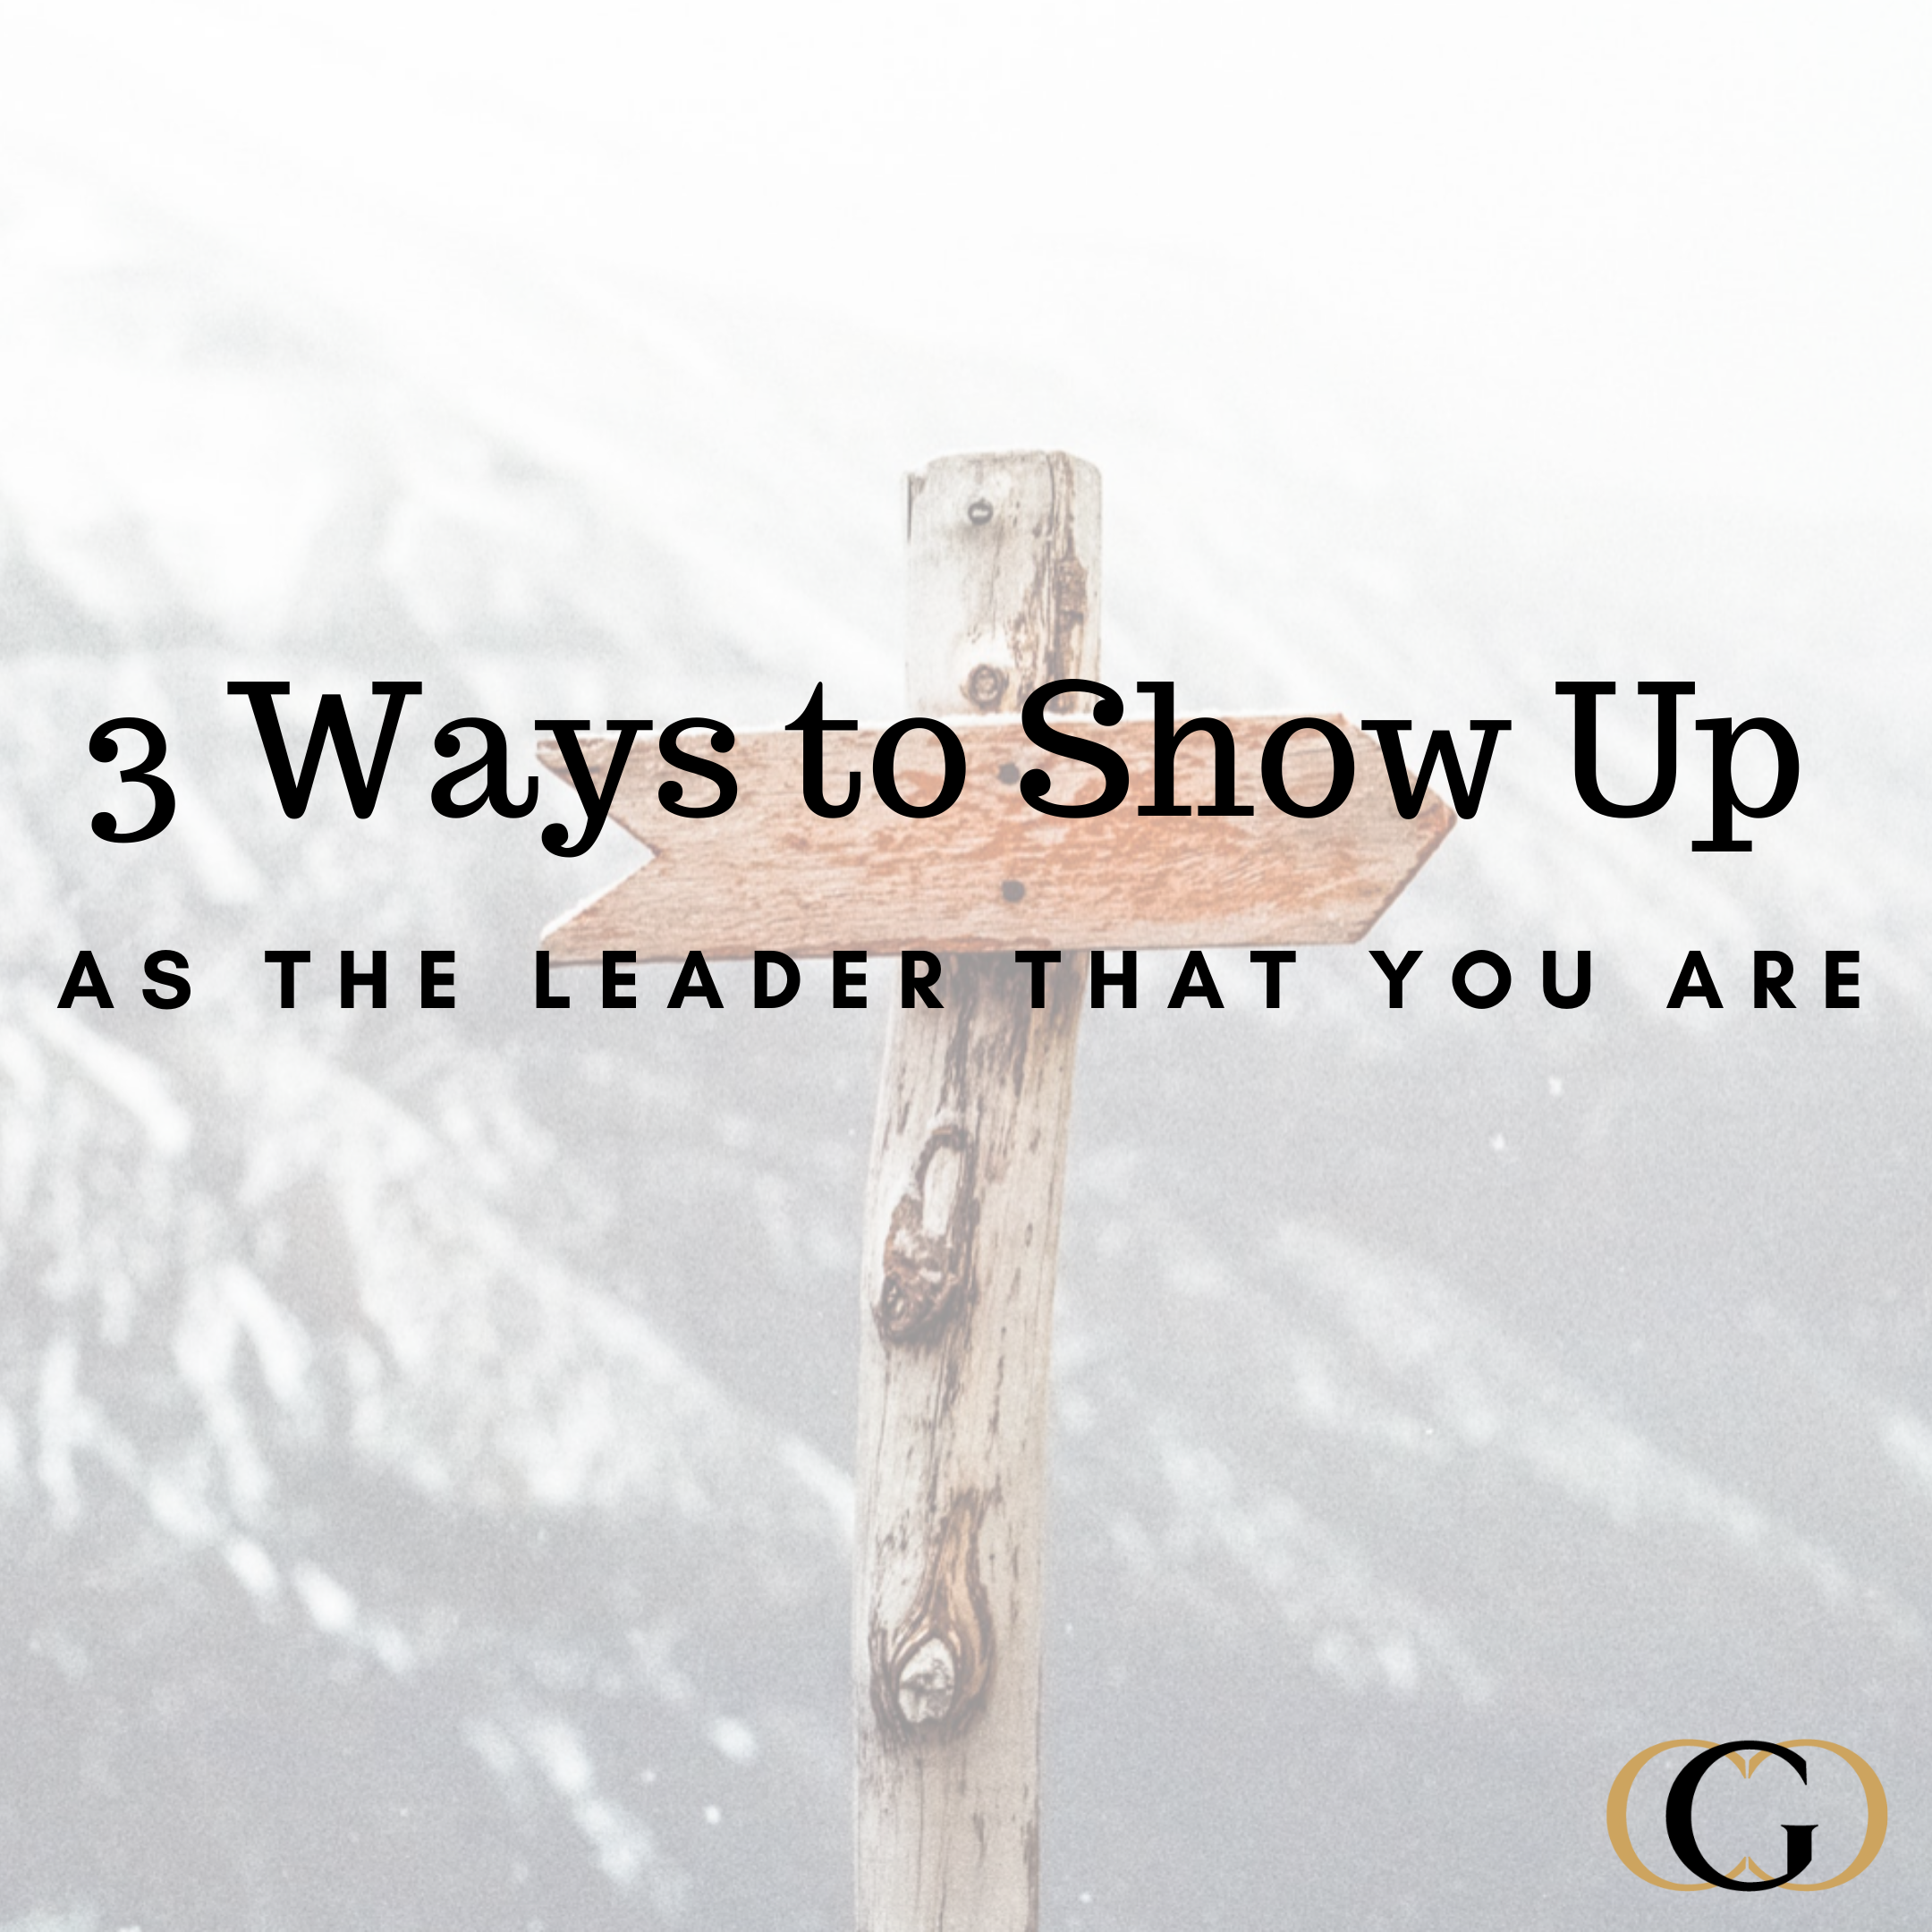 3 Ways to Show Up as the Leader that You Are